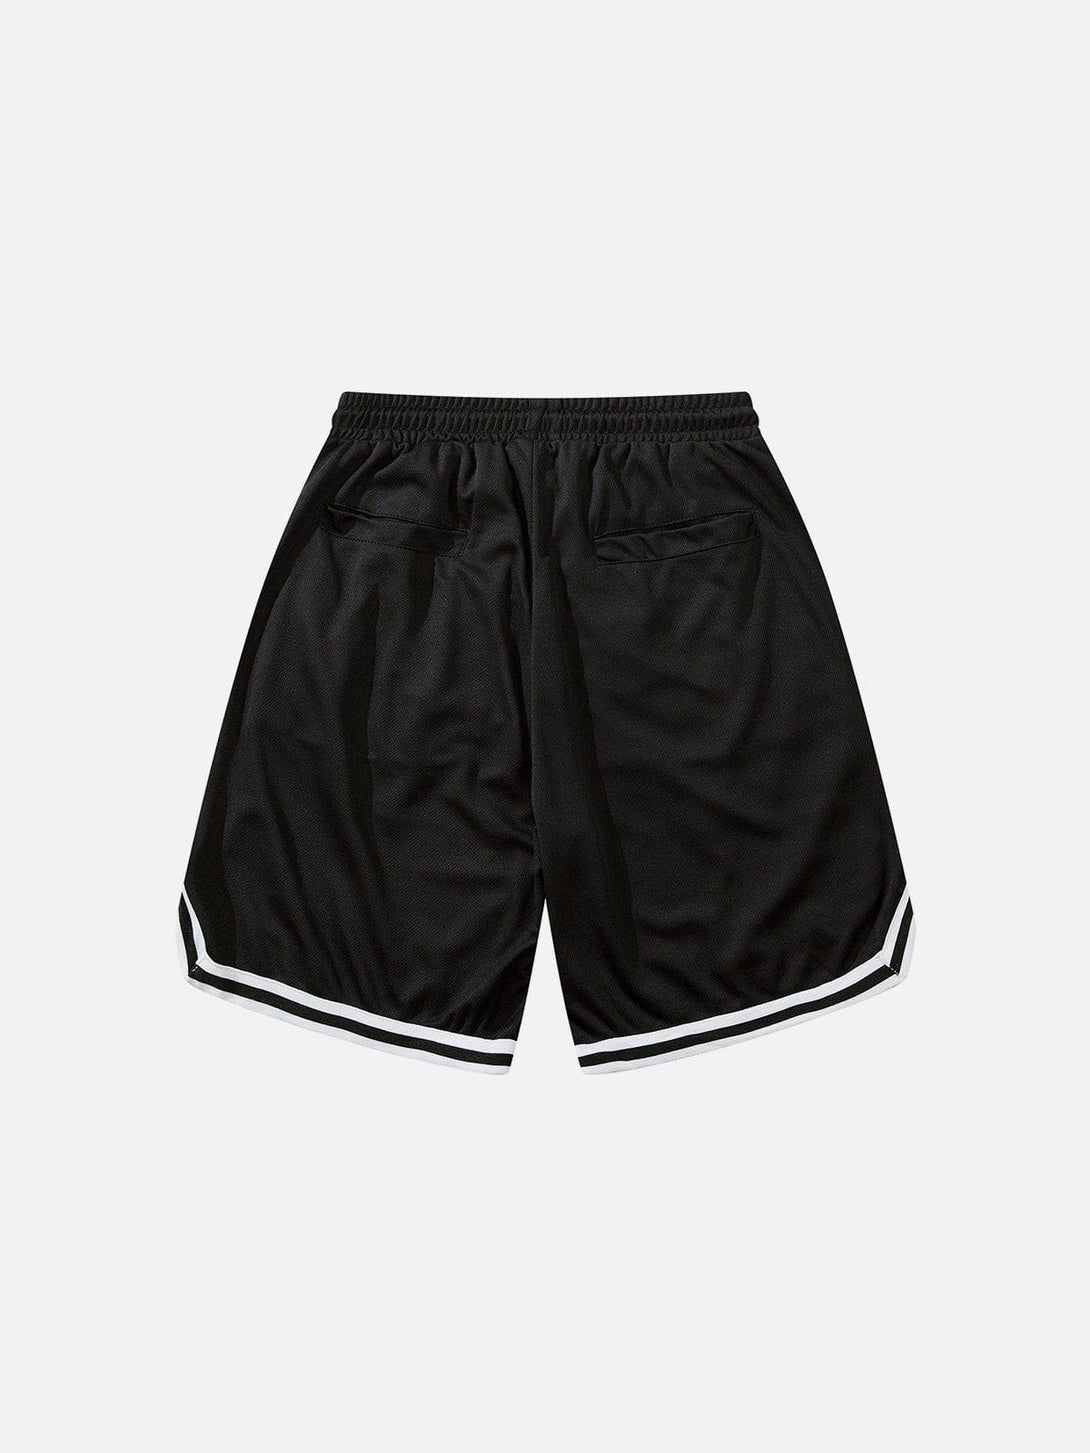 Levefly - Letter Embroidered Stripes Shorts - Streetwear Fashion - levefly.com